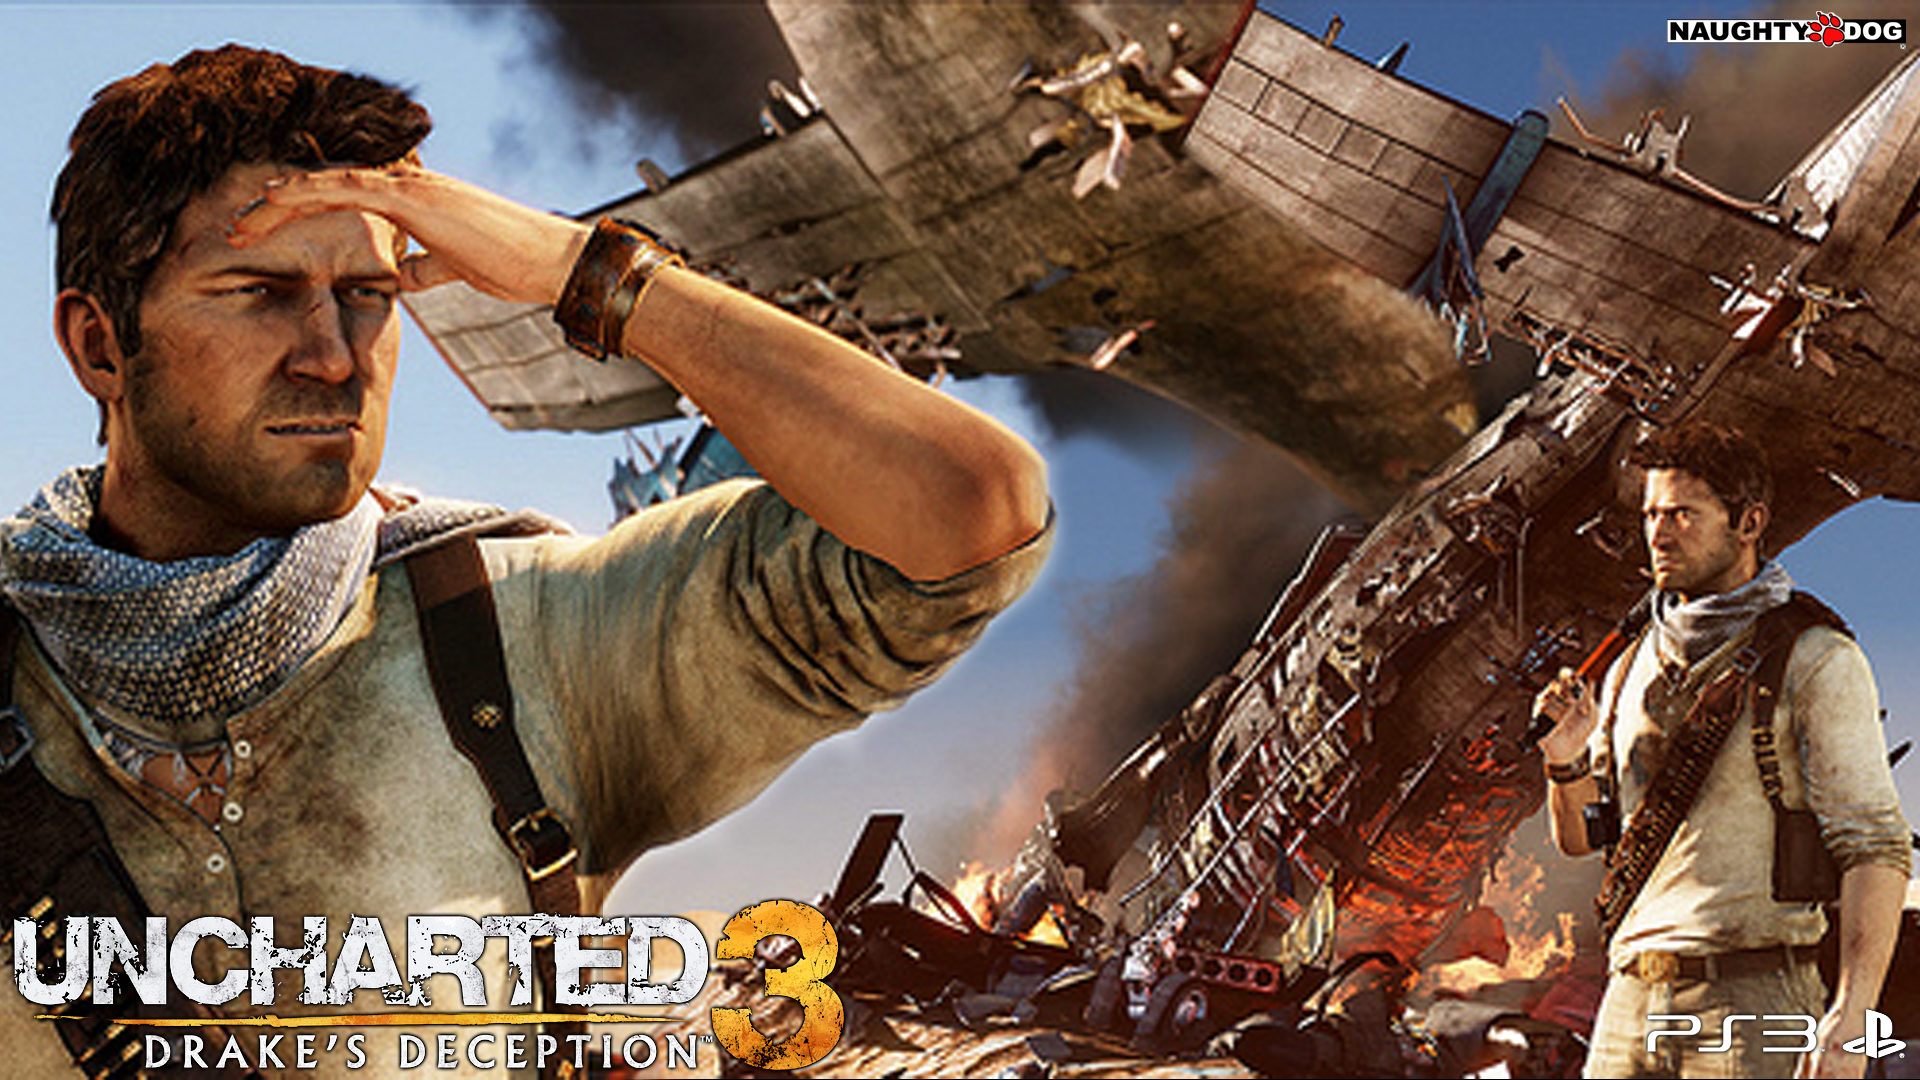 Uncharted 3 Wallpaper Drakes Deception.png - Uncharted, Transparent background PNG HD thumbnail